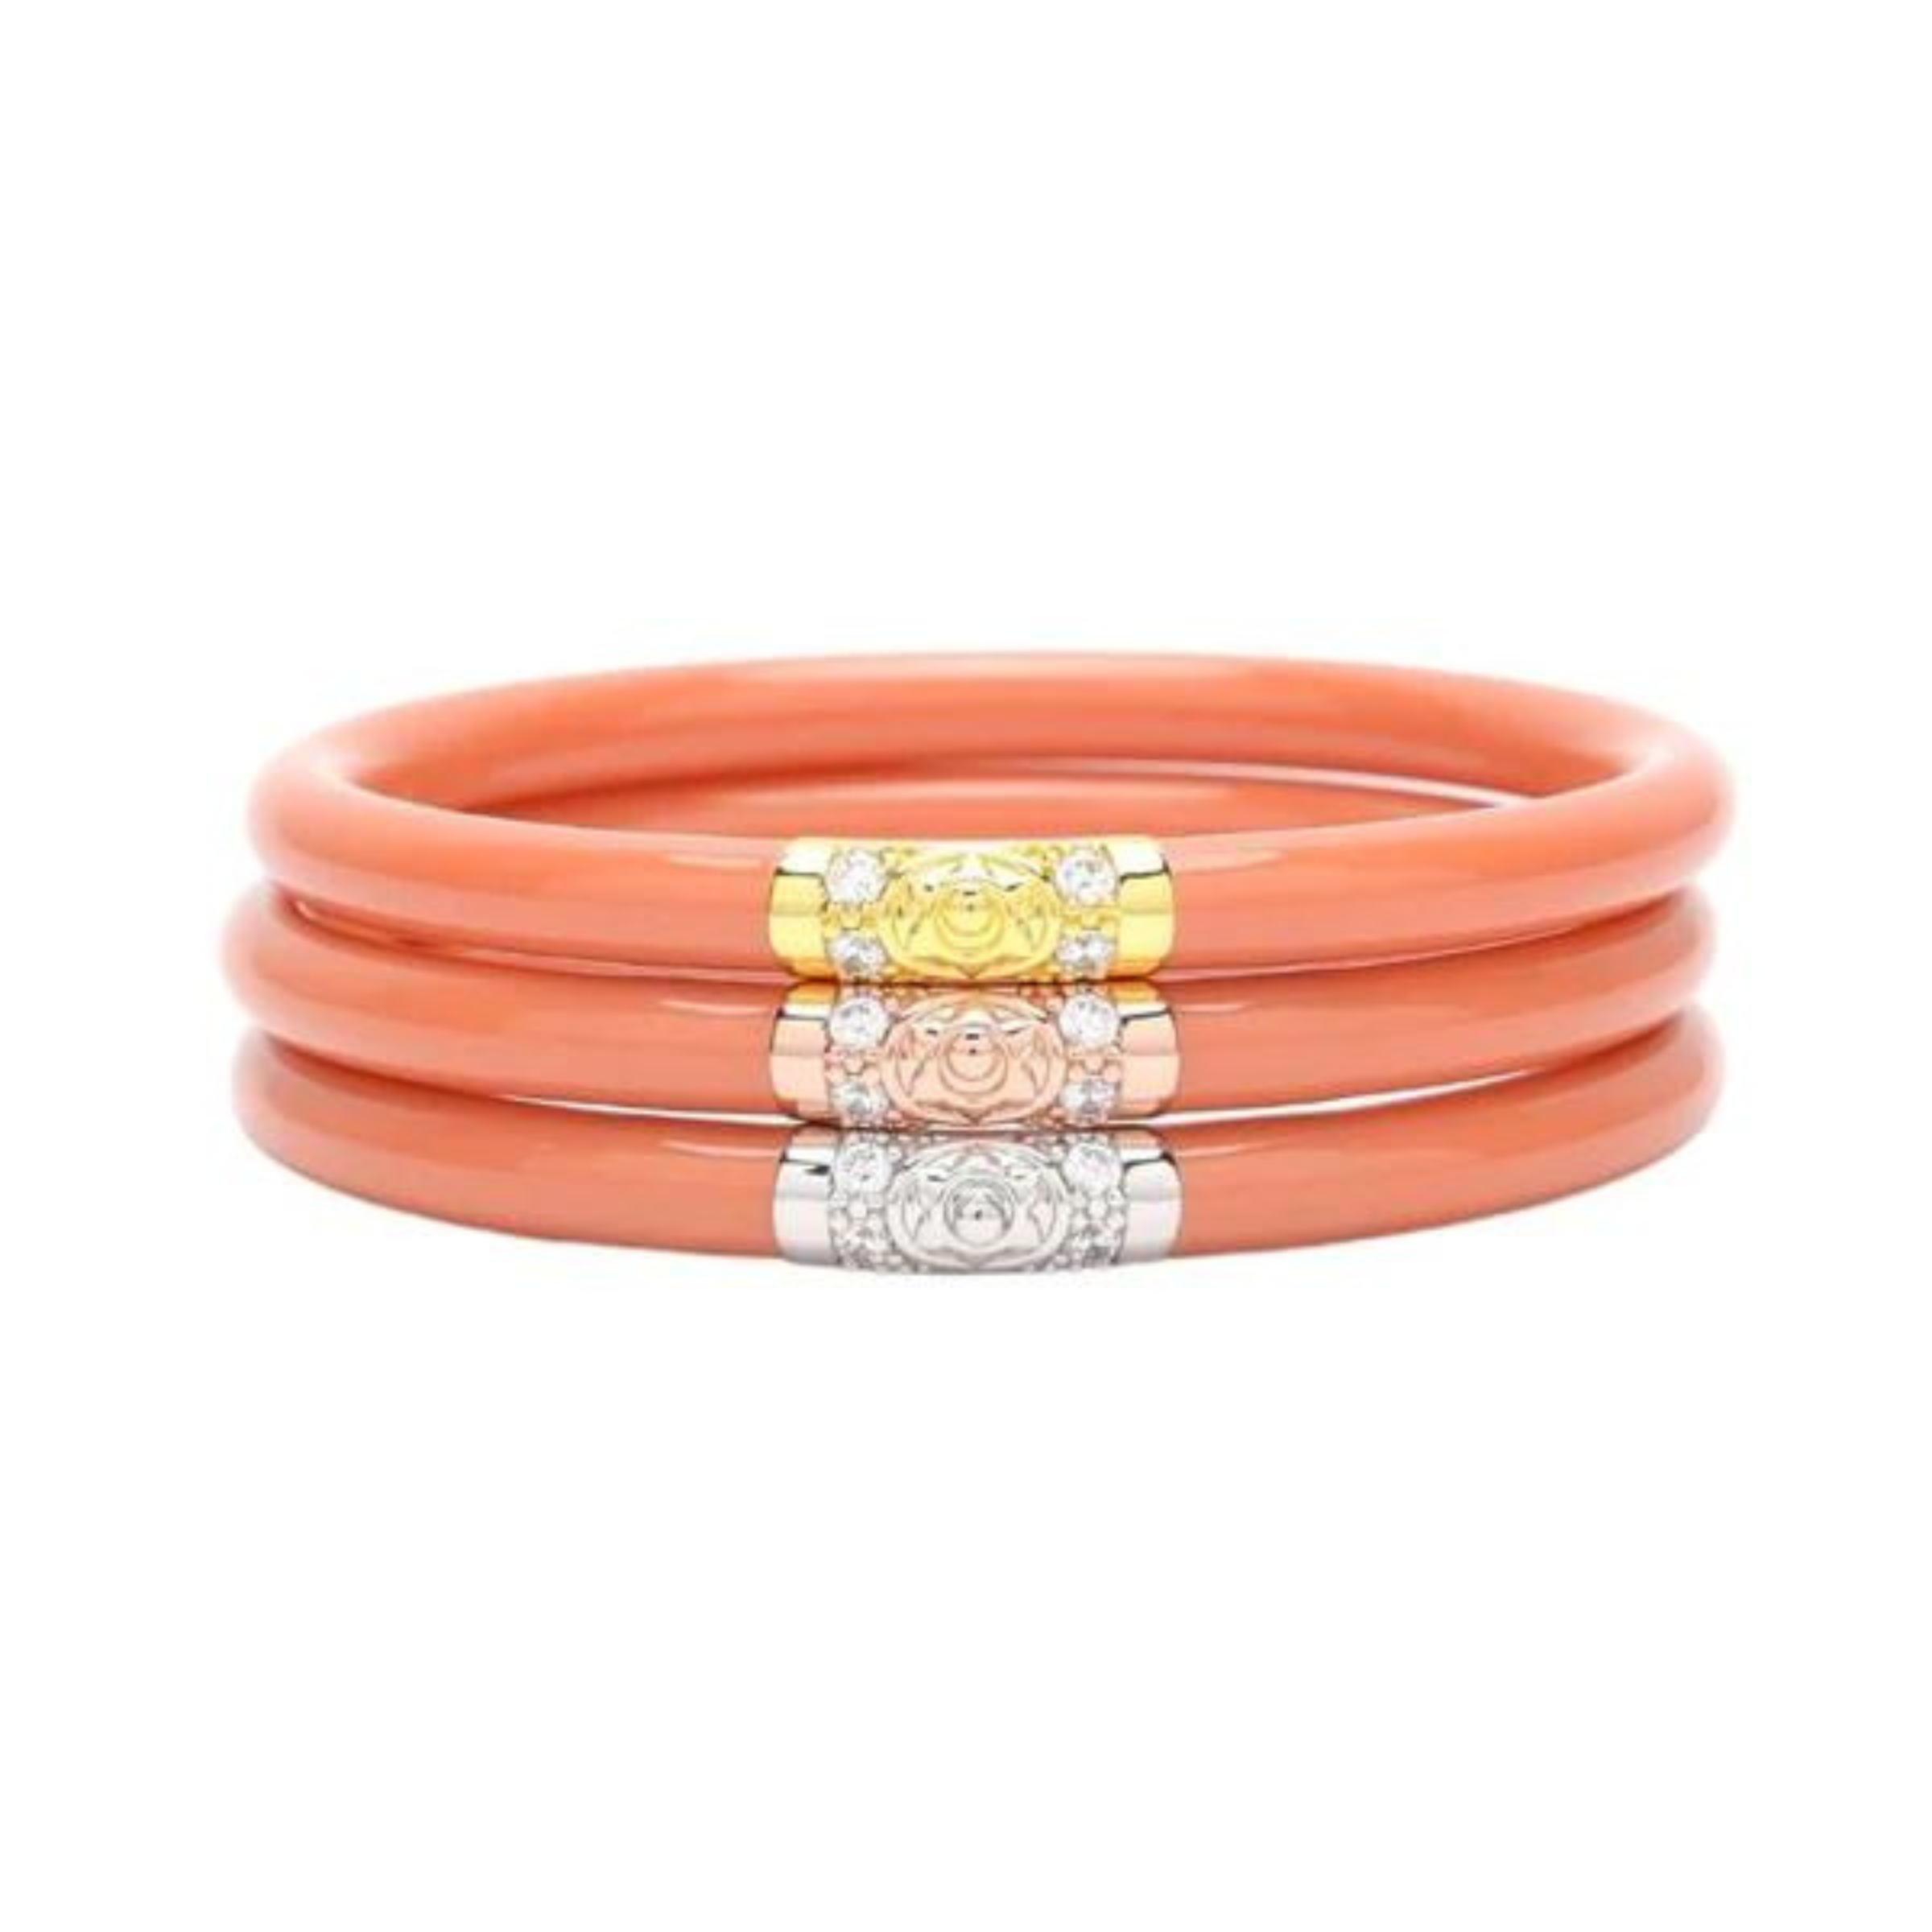 Three coral pink plastic, tube bracelet with one bracelet with a gold segment, one with a rose gold segment, and the other with a silver segment. These bracelets are pictured on top of each other on a white background. 